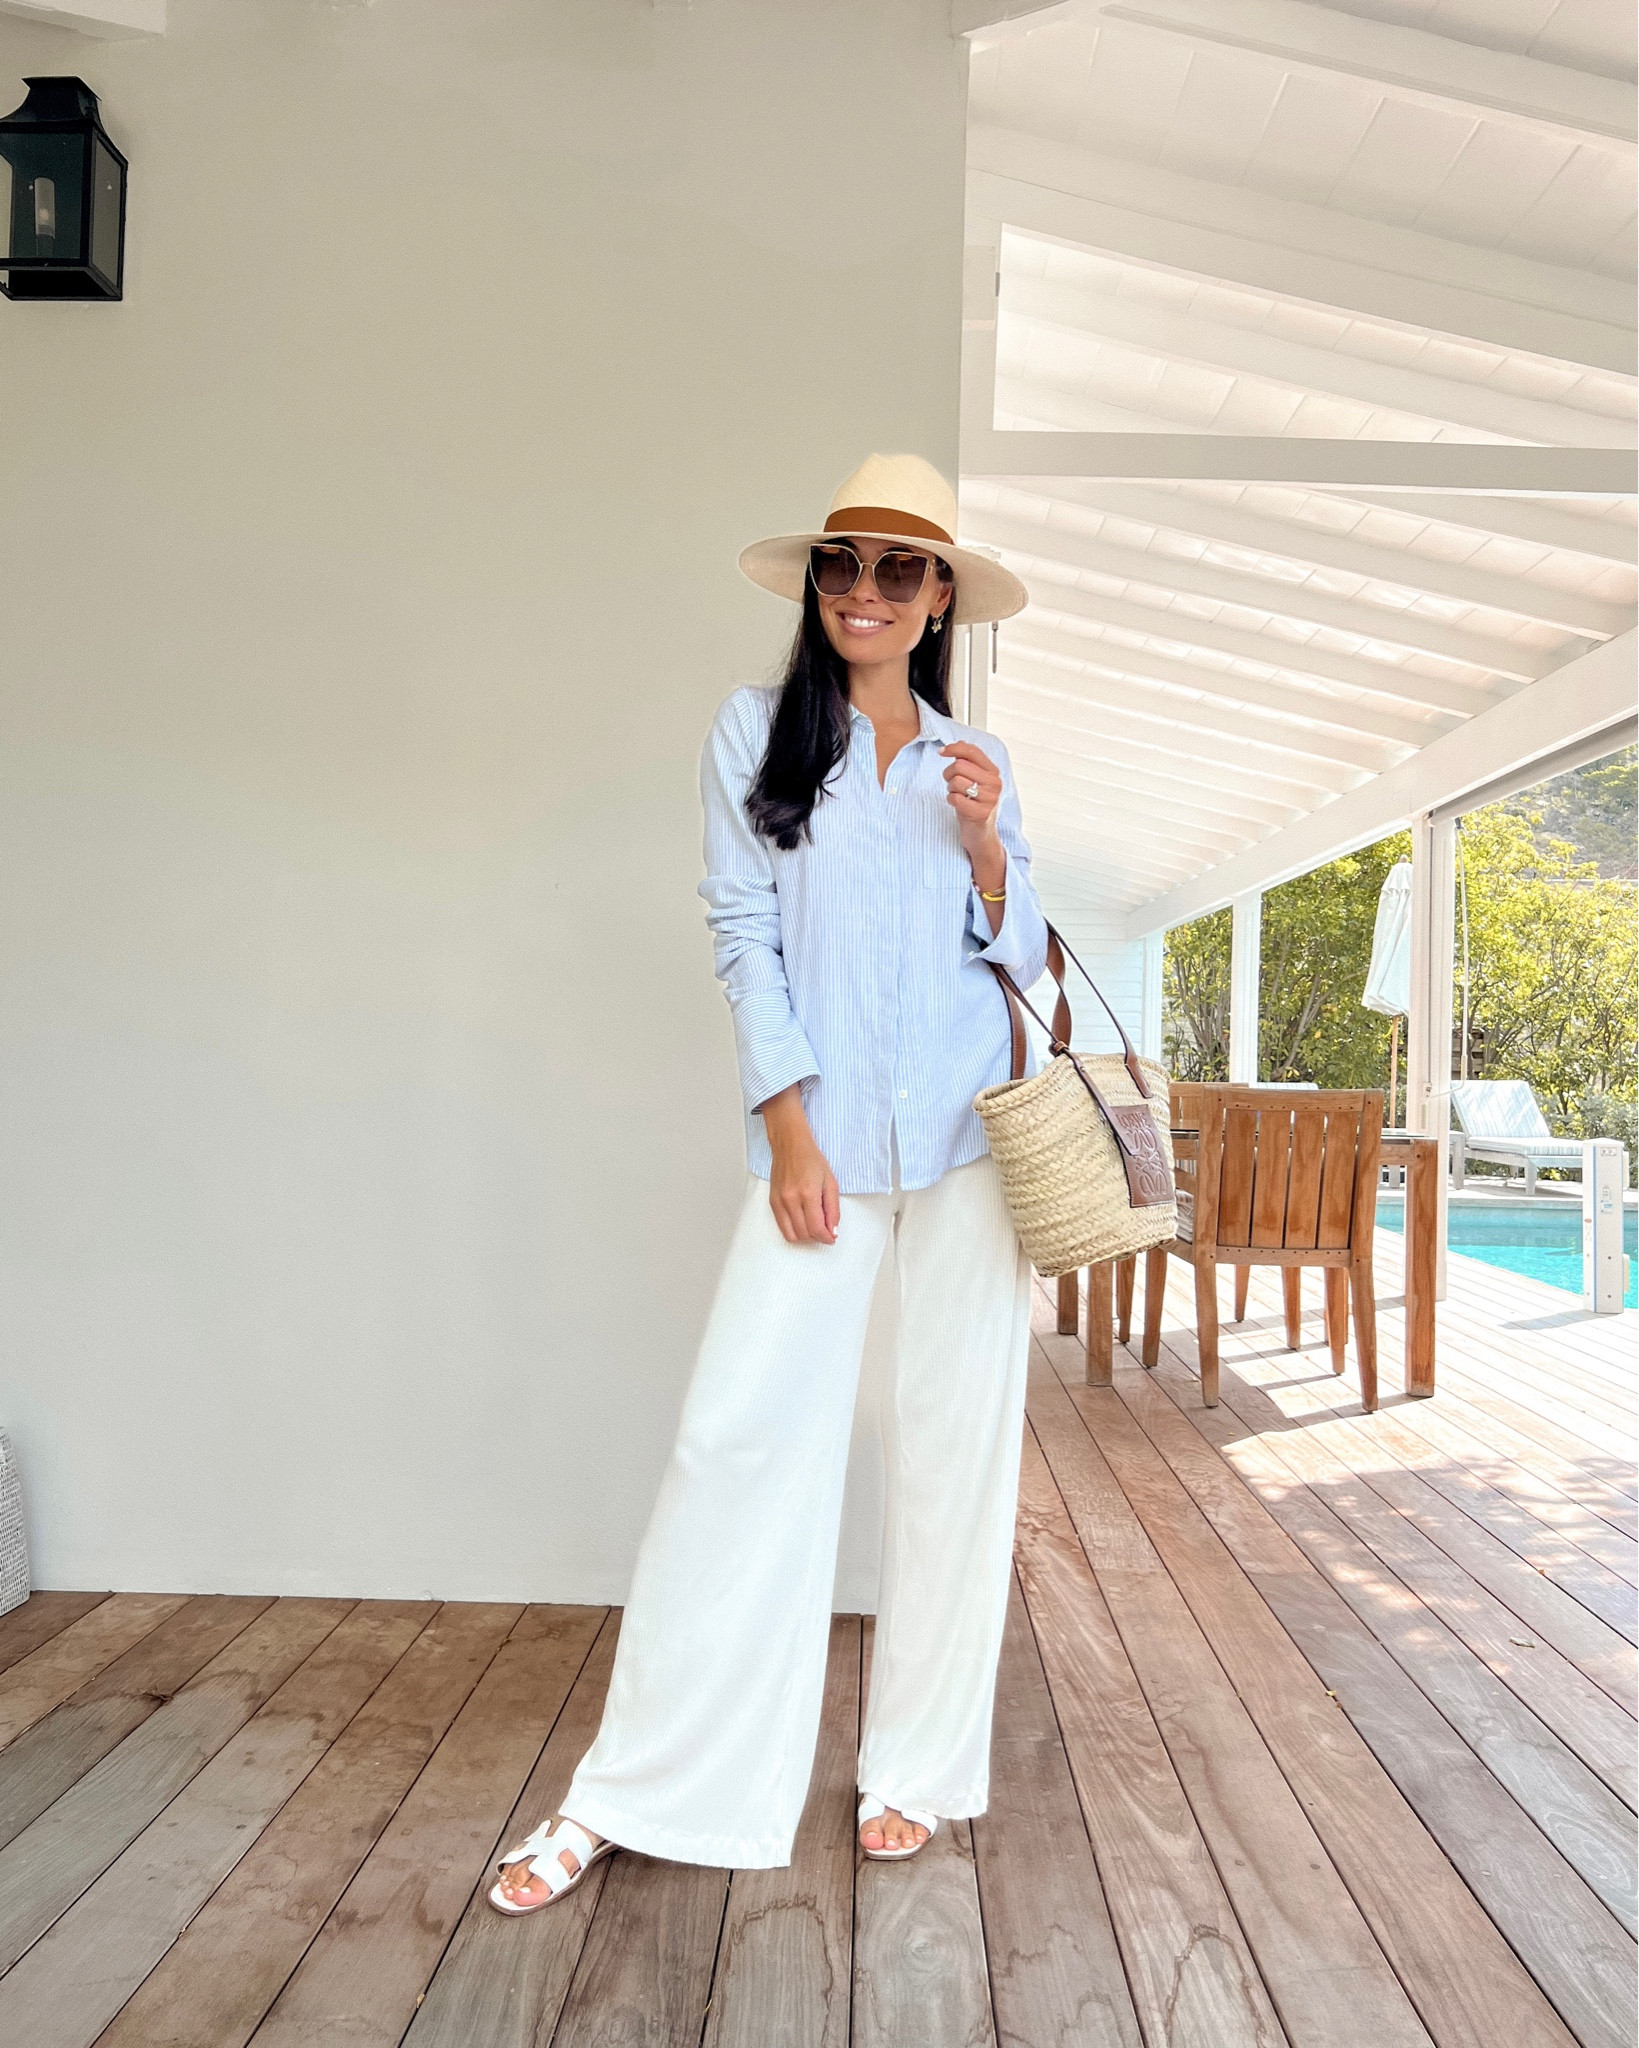 outfit-palazzo-pants-beach-style-floppy-hat-white-blouse-new-look-hm-7